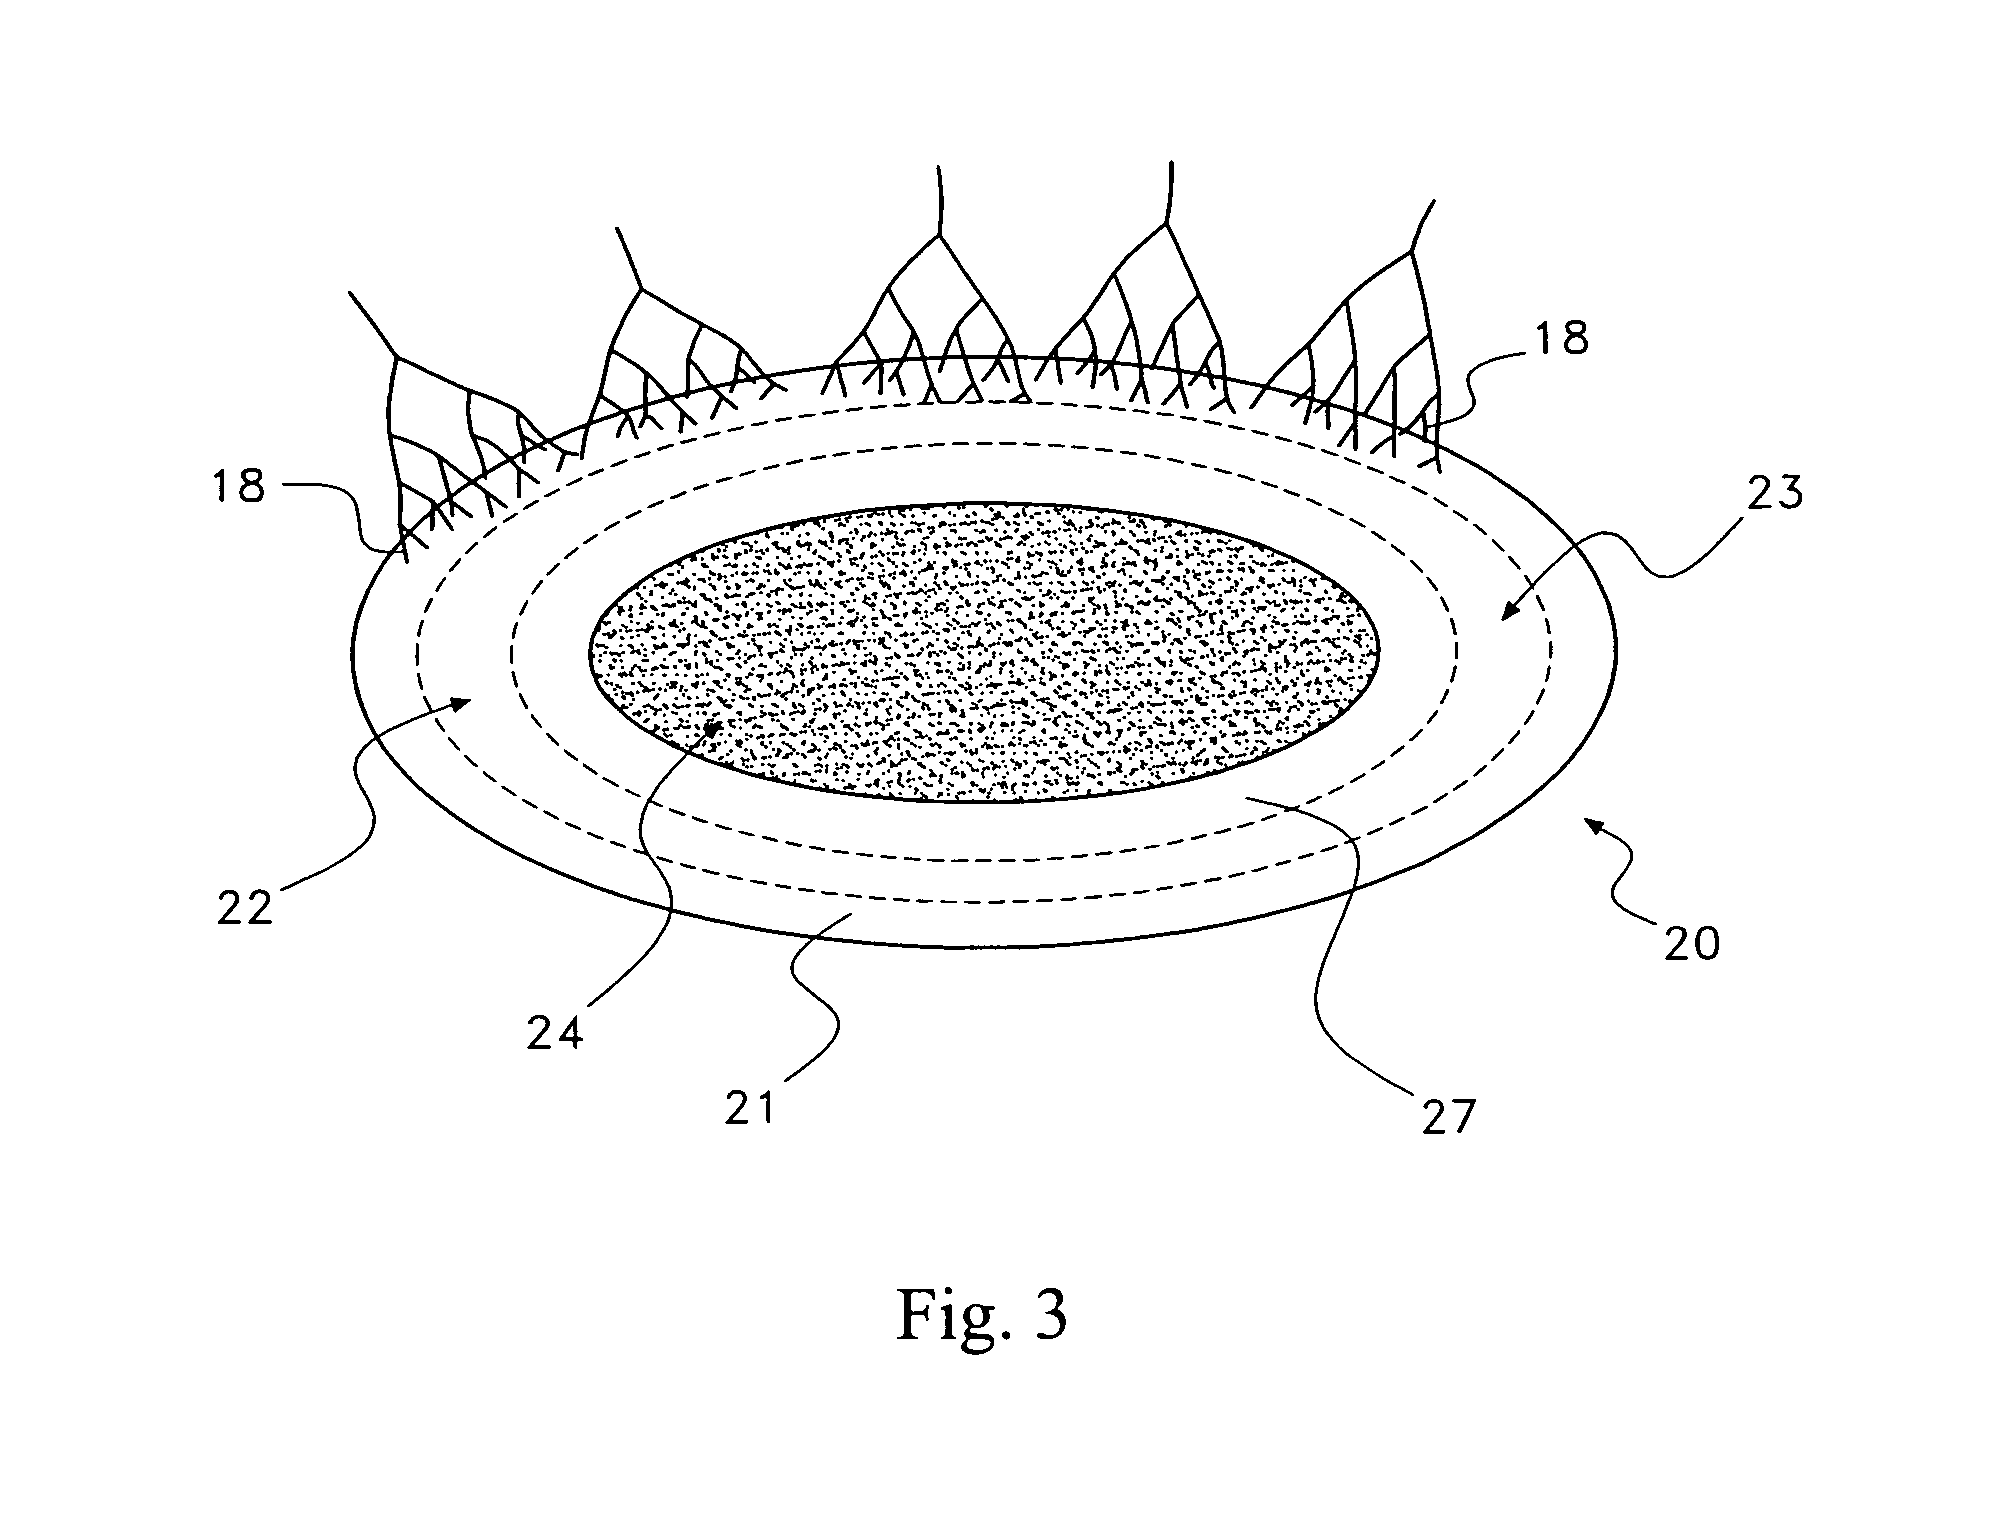 Pharmaceutical removal of neuronal extensions from a degenerating disc